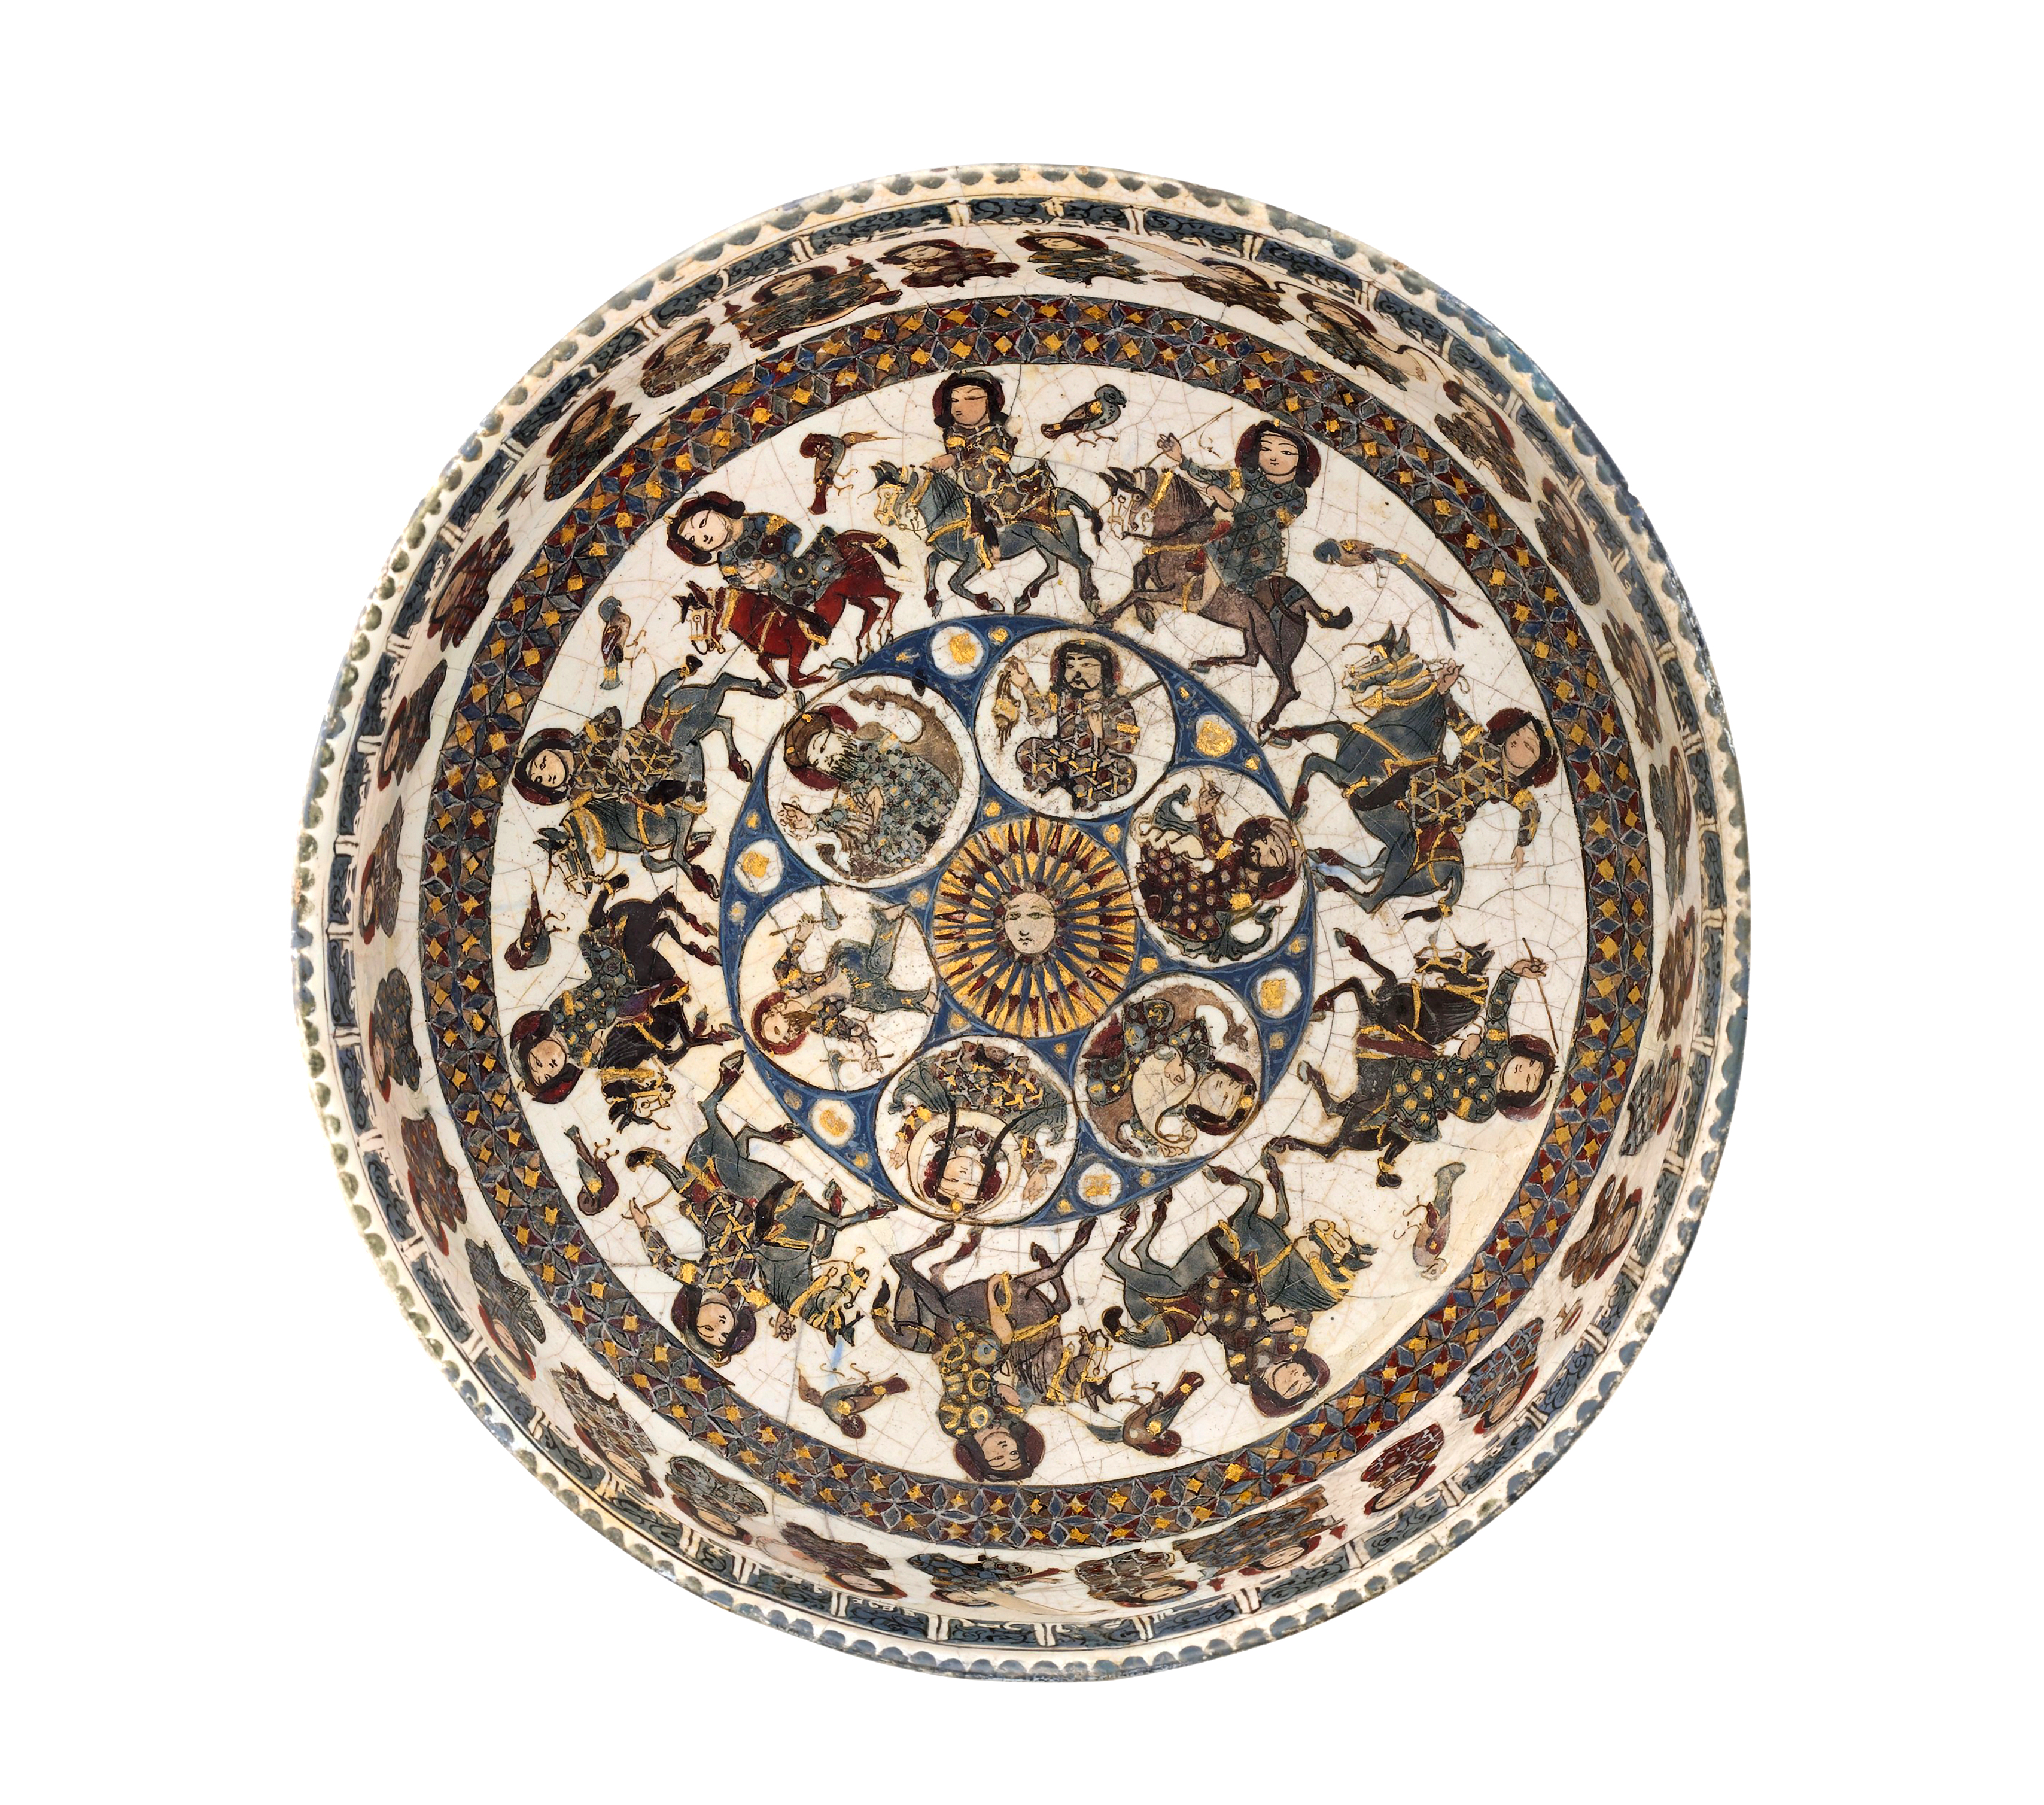 Bowl with courtly and astrological motifs from northern Iran, stonepaste with polychromatic inglaze and overglaze, painted and gilded, late twelfth or early thirteenth century. Mercury is represented as a scribe with a scroll, Venus as a female musician, Saturn as an old man with a pick axe, Jupiter as a judge in a turban, Mars as a warrior with a severed head, the Sun as a figure with a solar disc, and the Moon as a figure with a lunar crescent. As reproduced in Sun & Moon